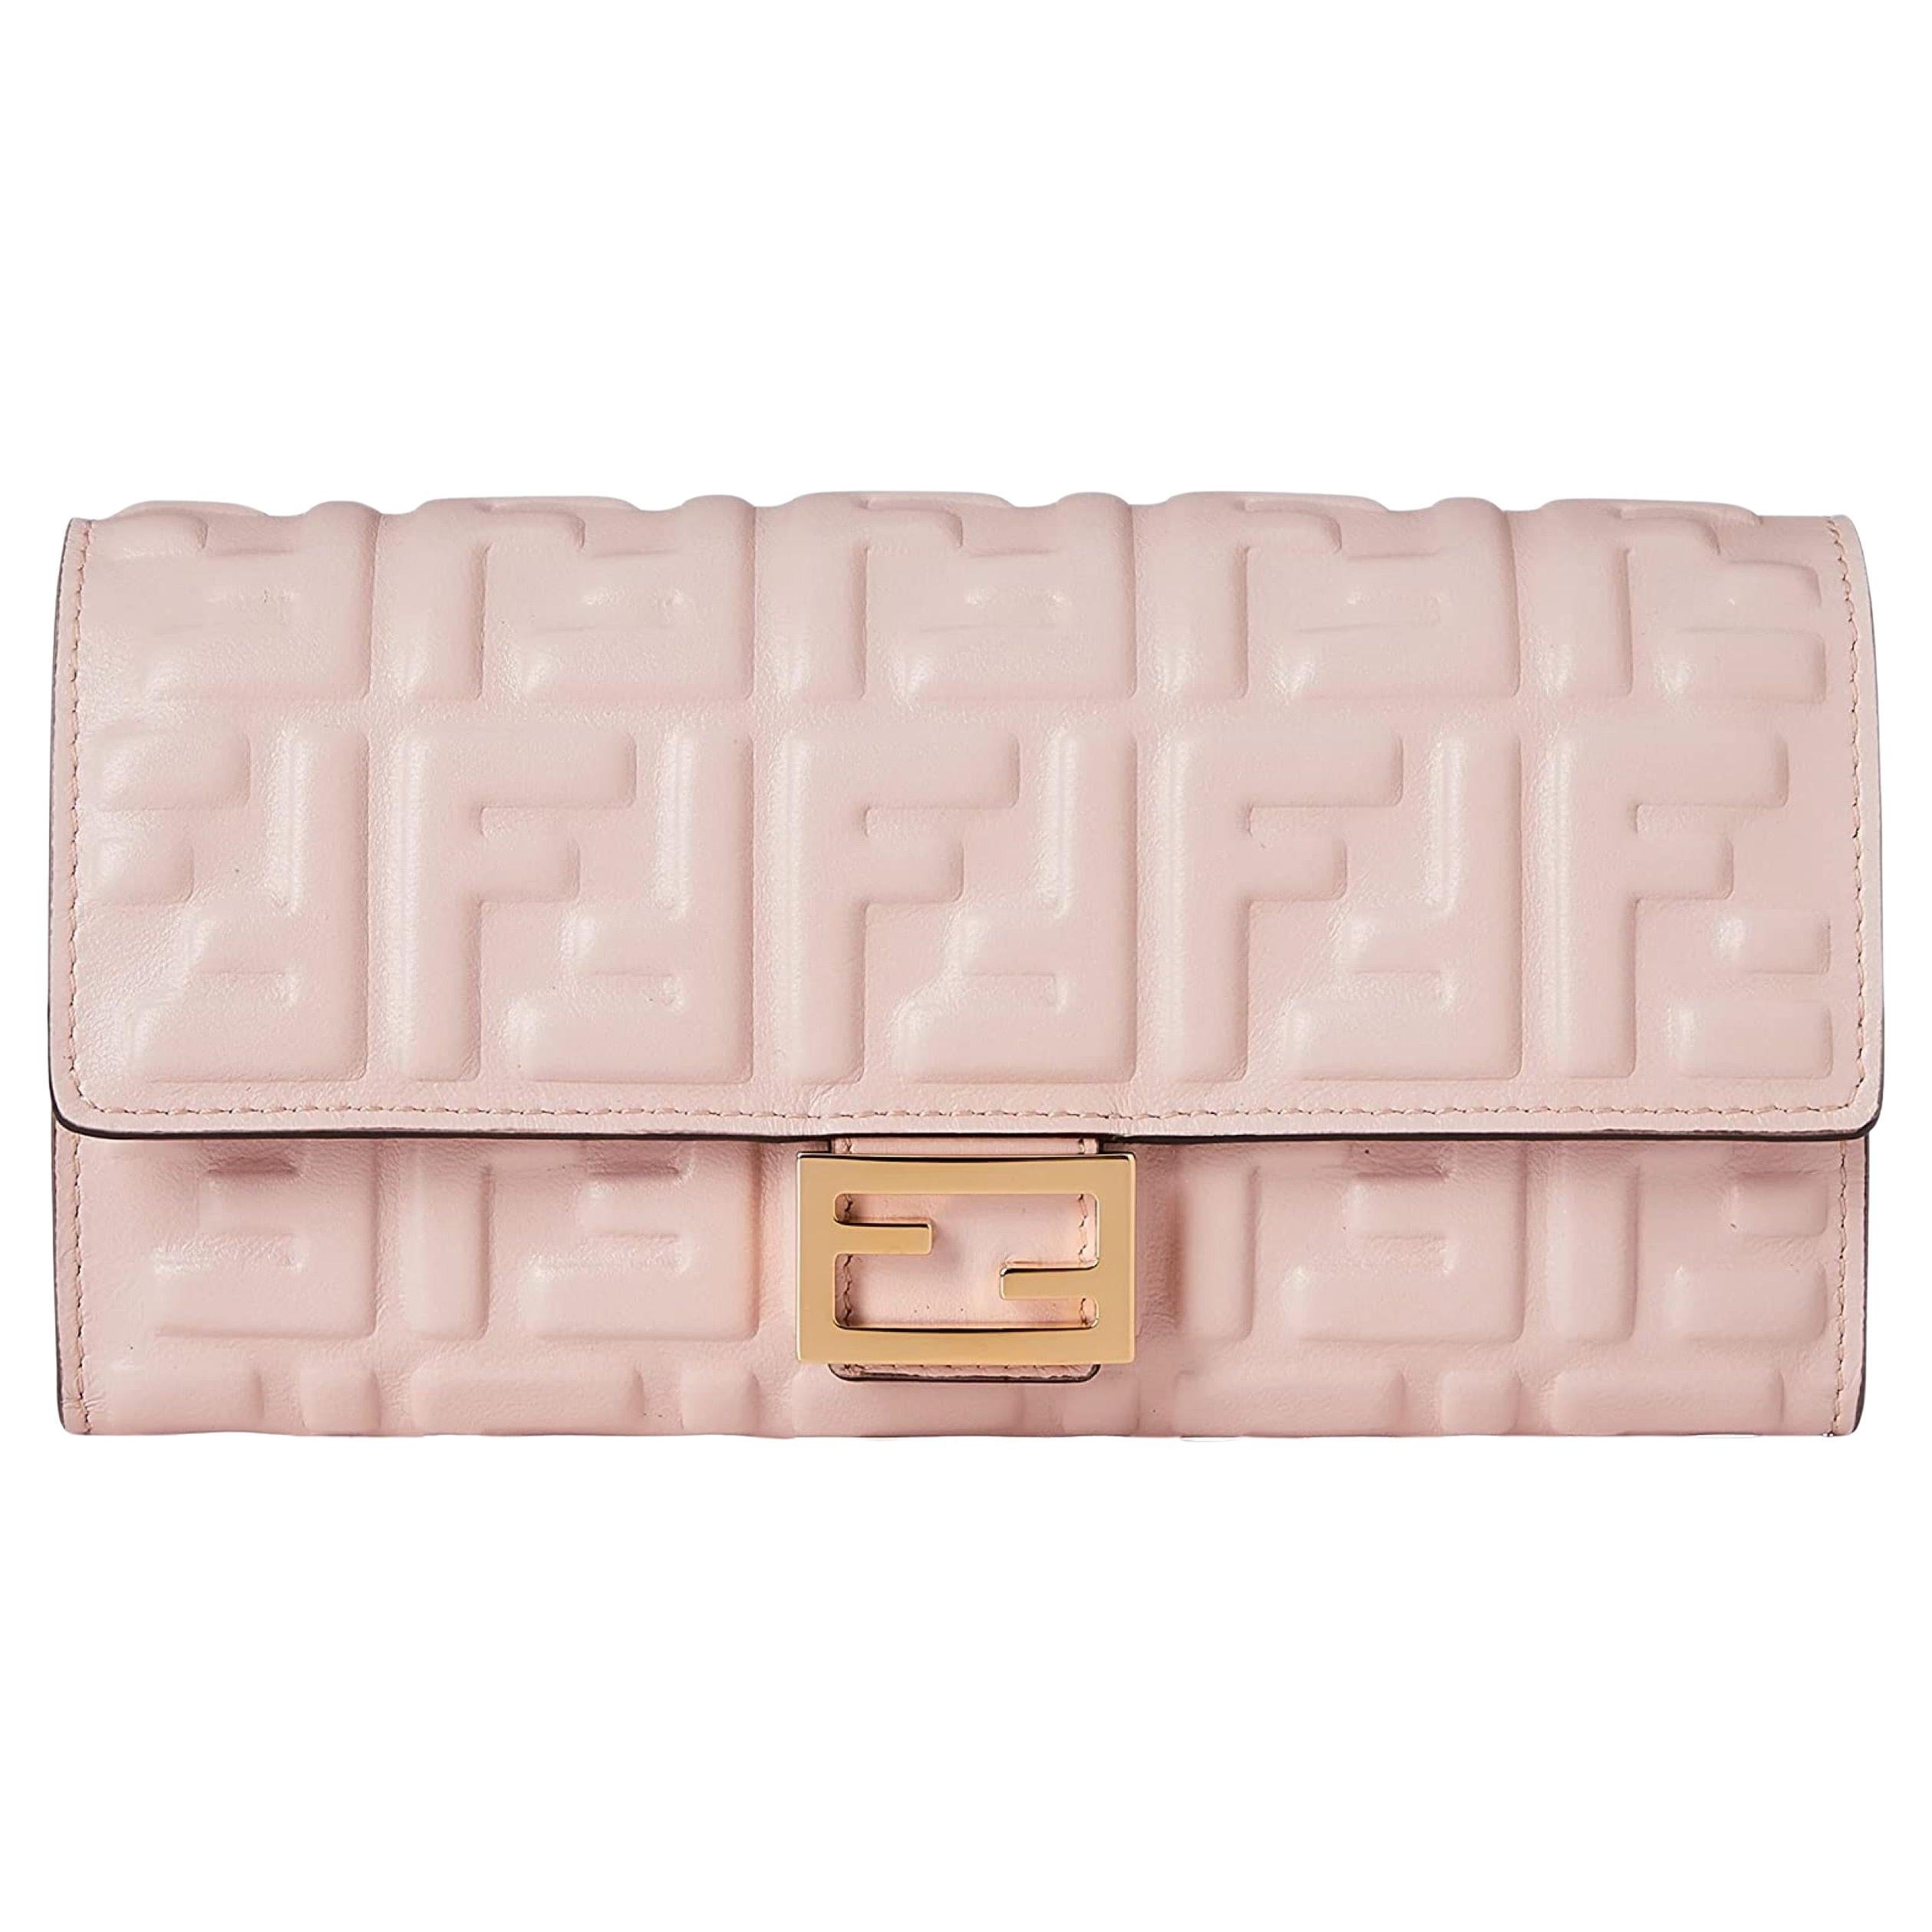 NEW Fendi Candy Pink Baguette FF Monogram Leather Continental Wallet Clutch Bag For Sale